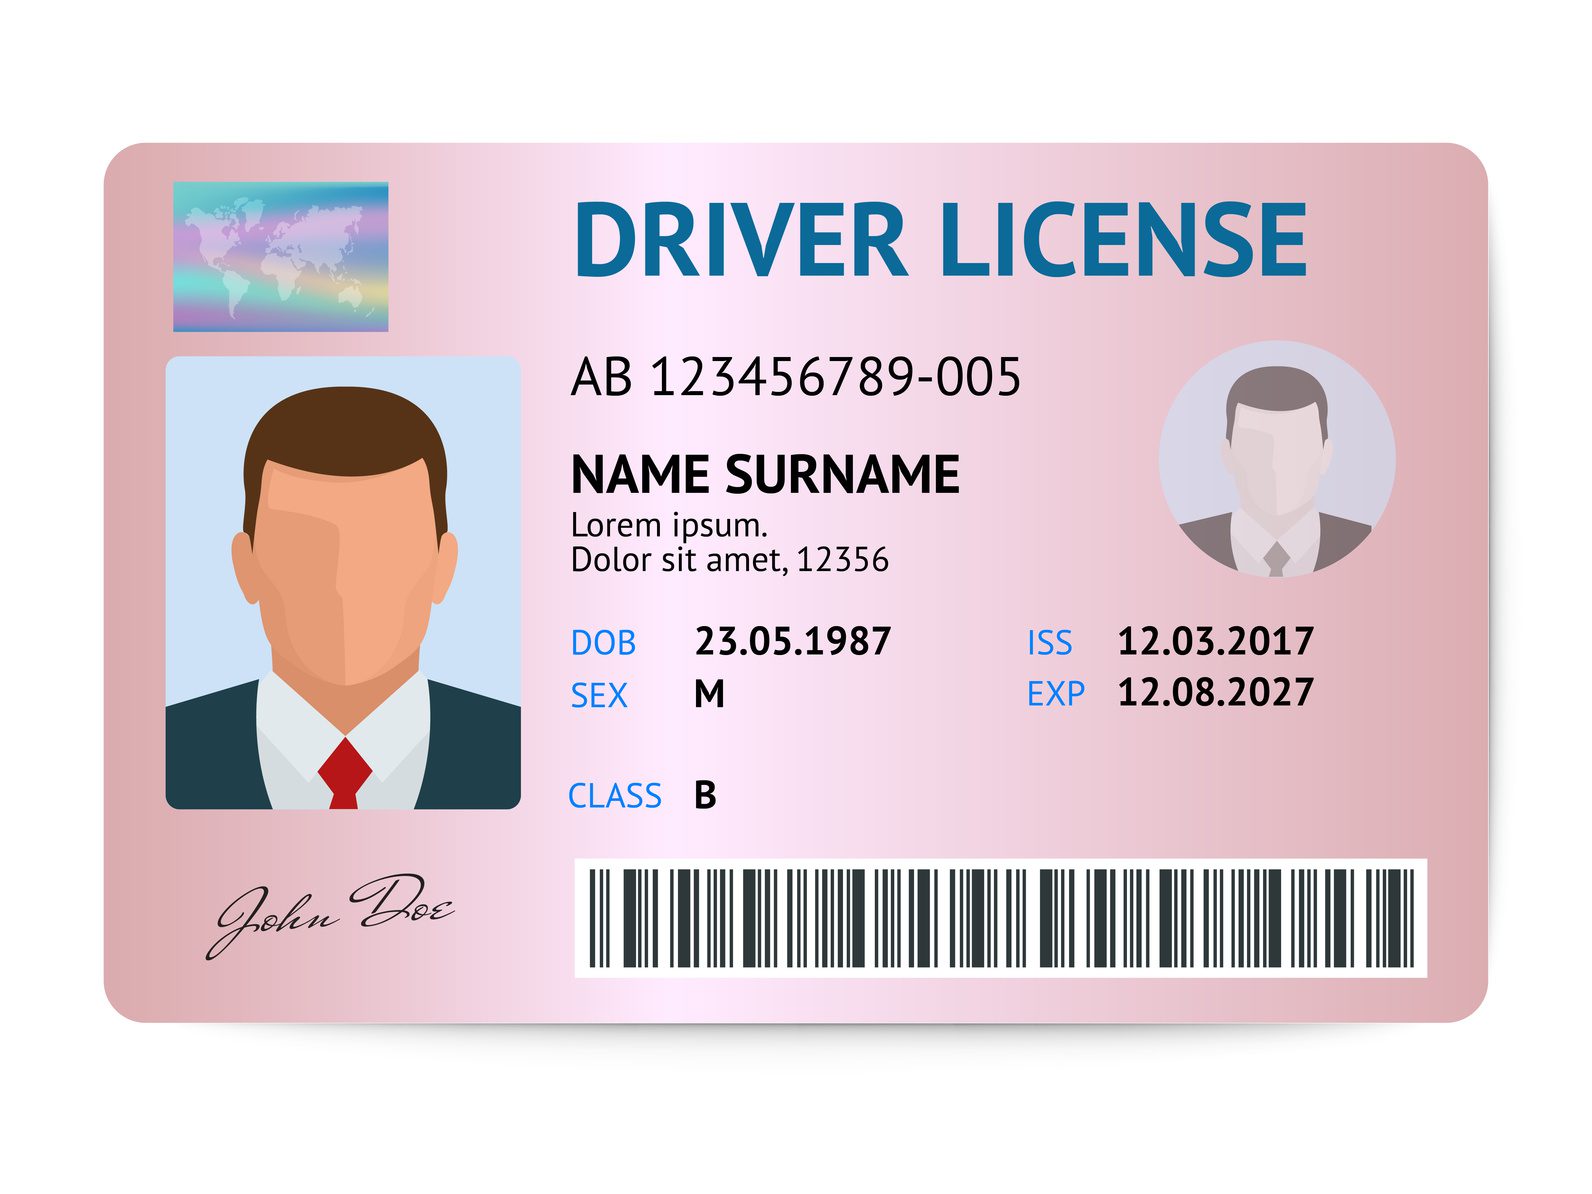 The Reinstatement Process for a Suspended Driver’s License